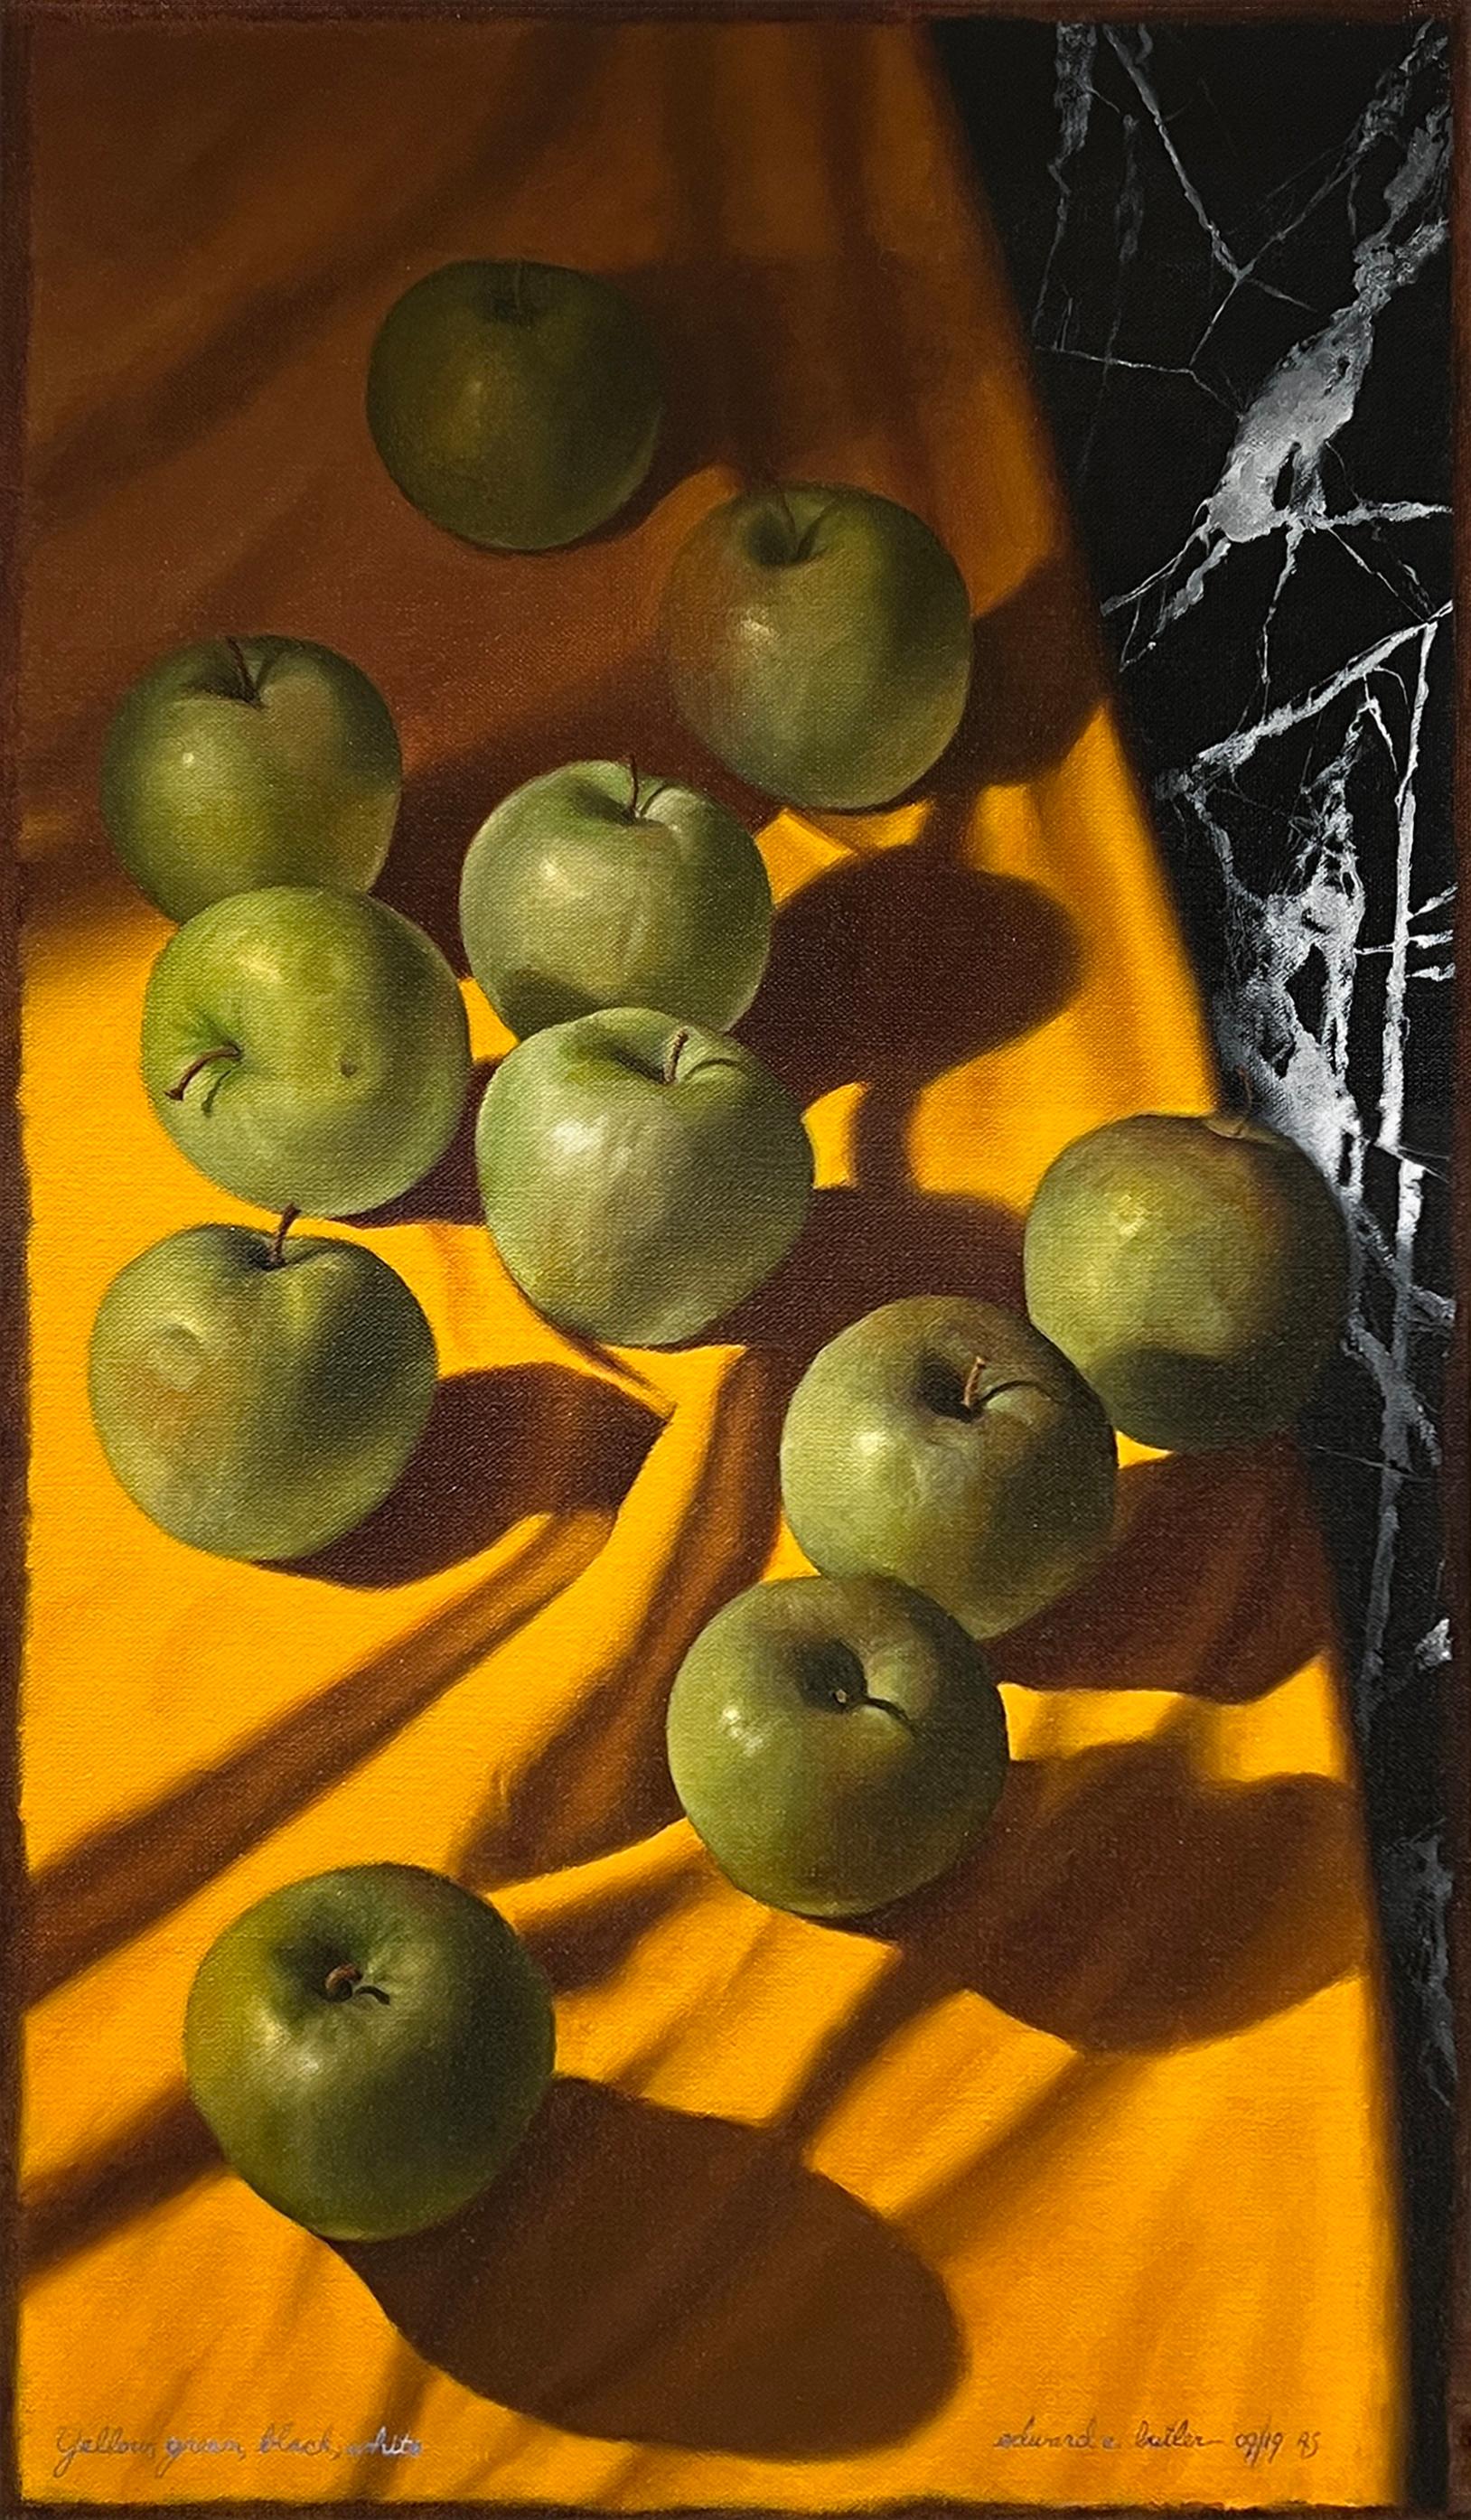 Edward Butler Still-Life Painting - YELLOW, GREEN, BLACK, WHITE - Contemporary Realism / Still Life Color Apples